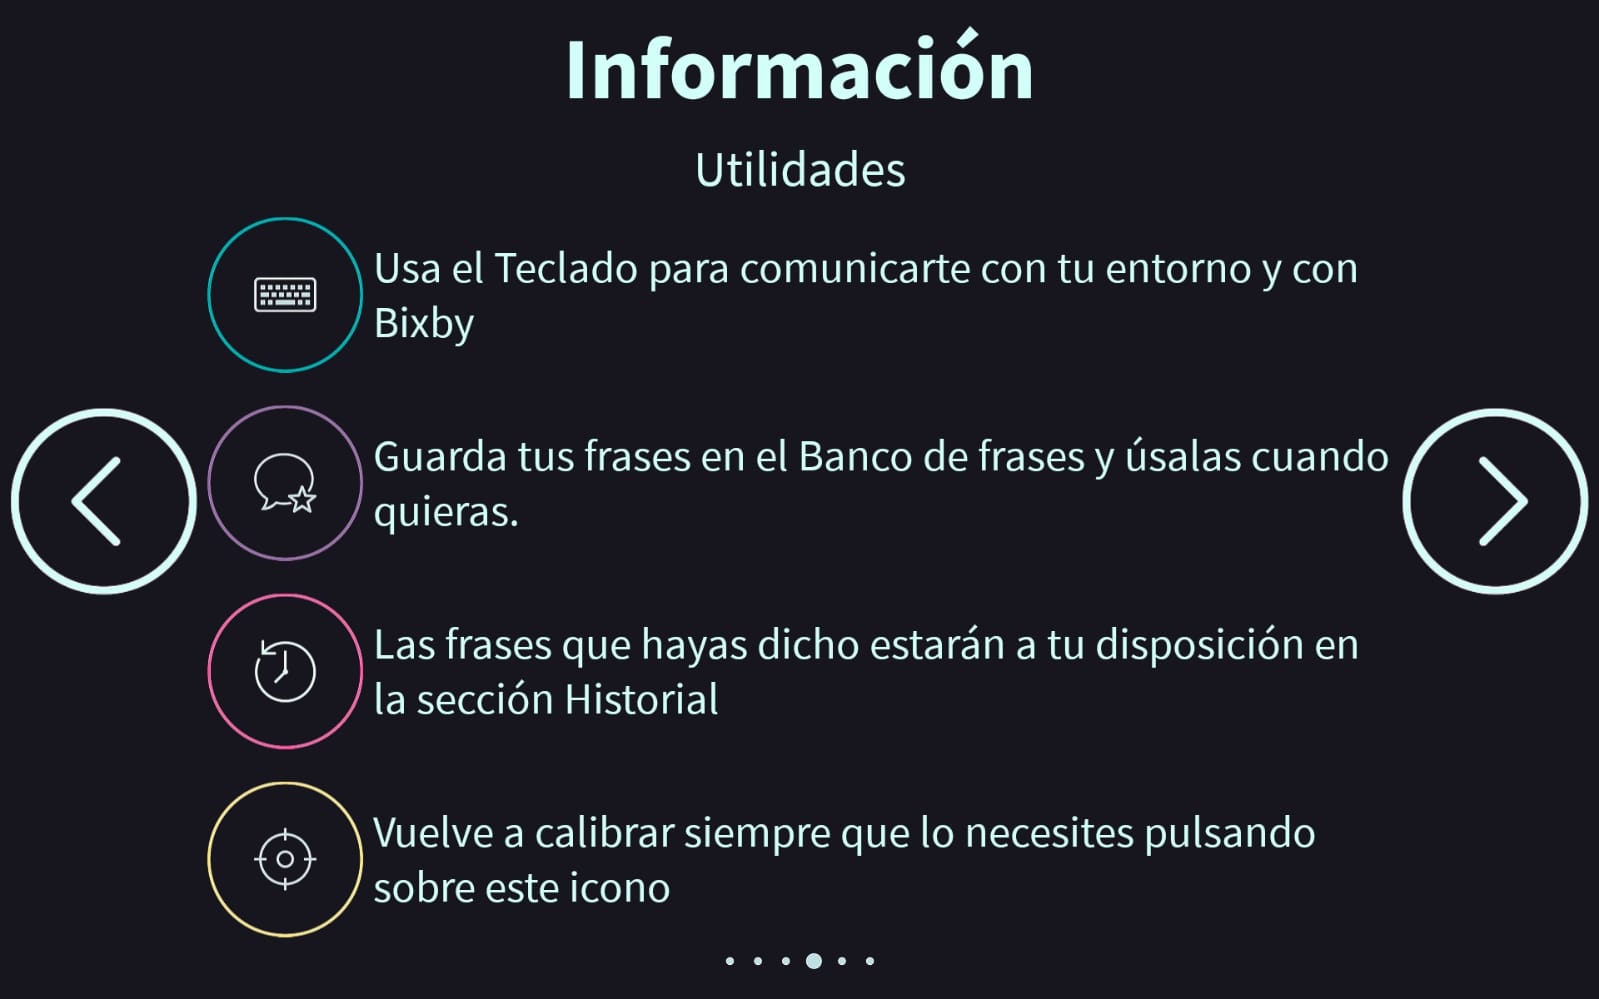 summarize each utility with one sentence; keyboard and bixby, phrase bank, history and calibration